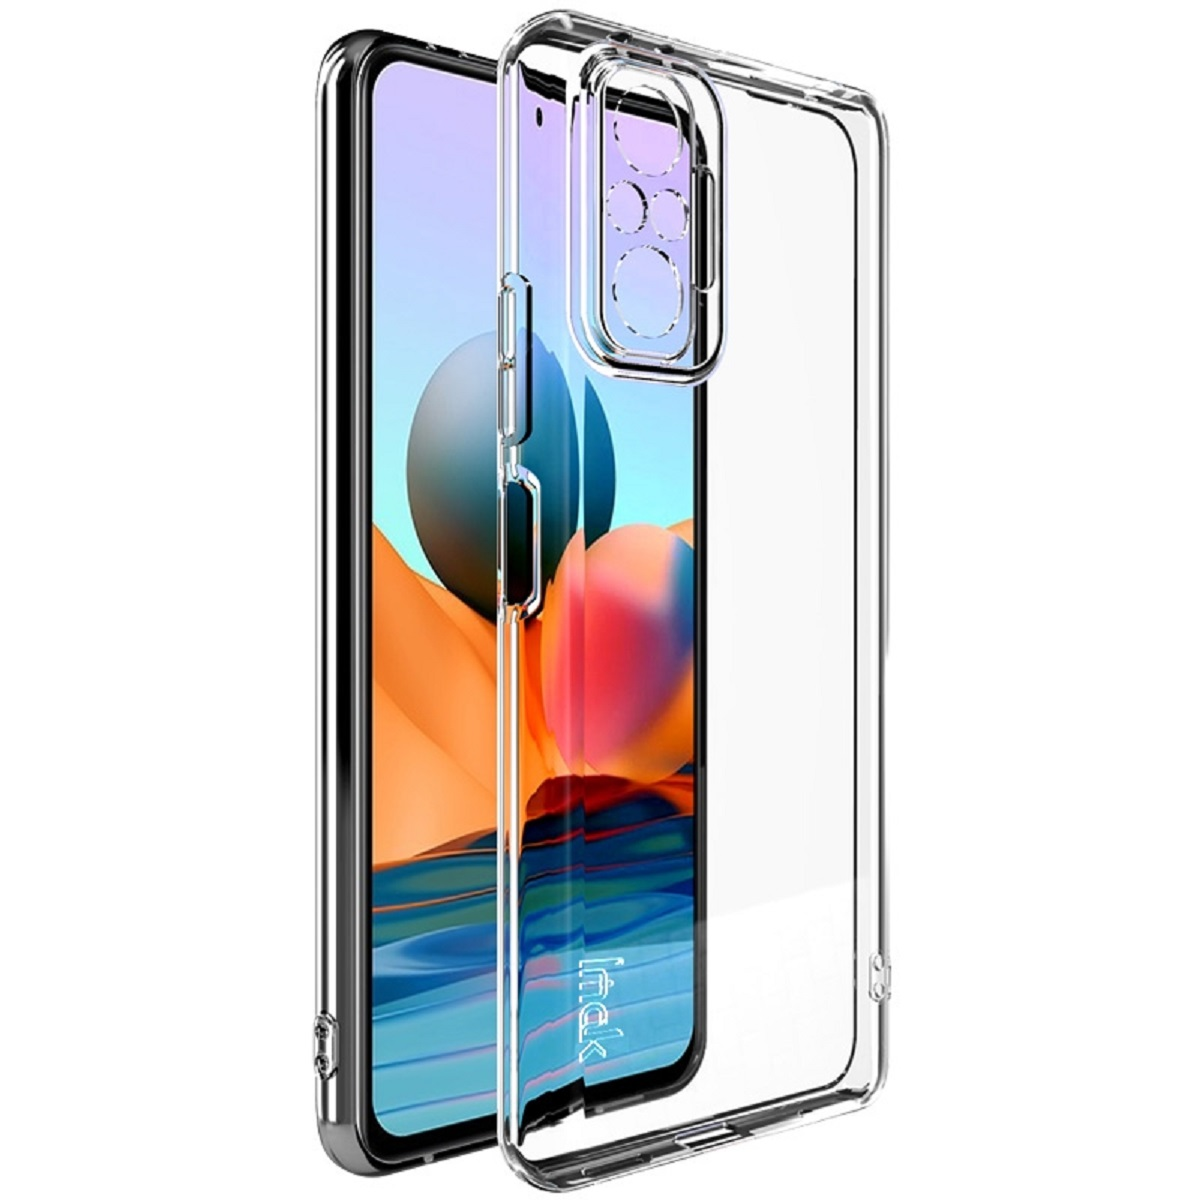 Hülle, Redmi Pro, Xiaomi, PROTECTORKING Backcover, 10 Backcover, Transparent Note